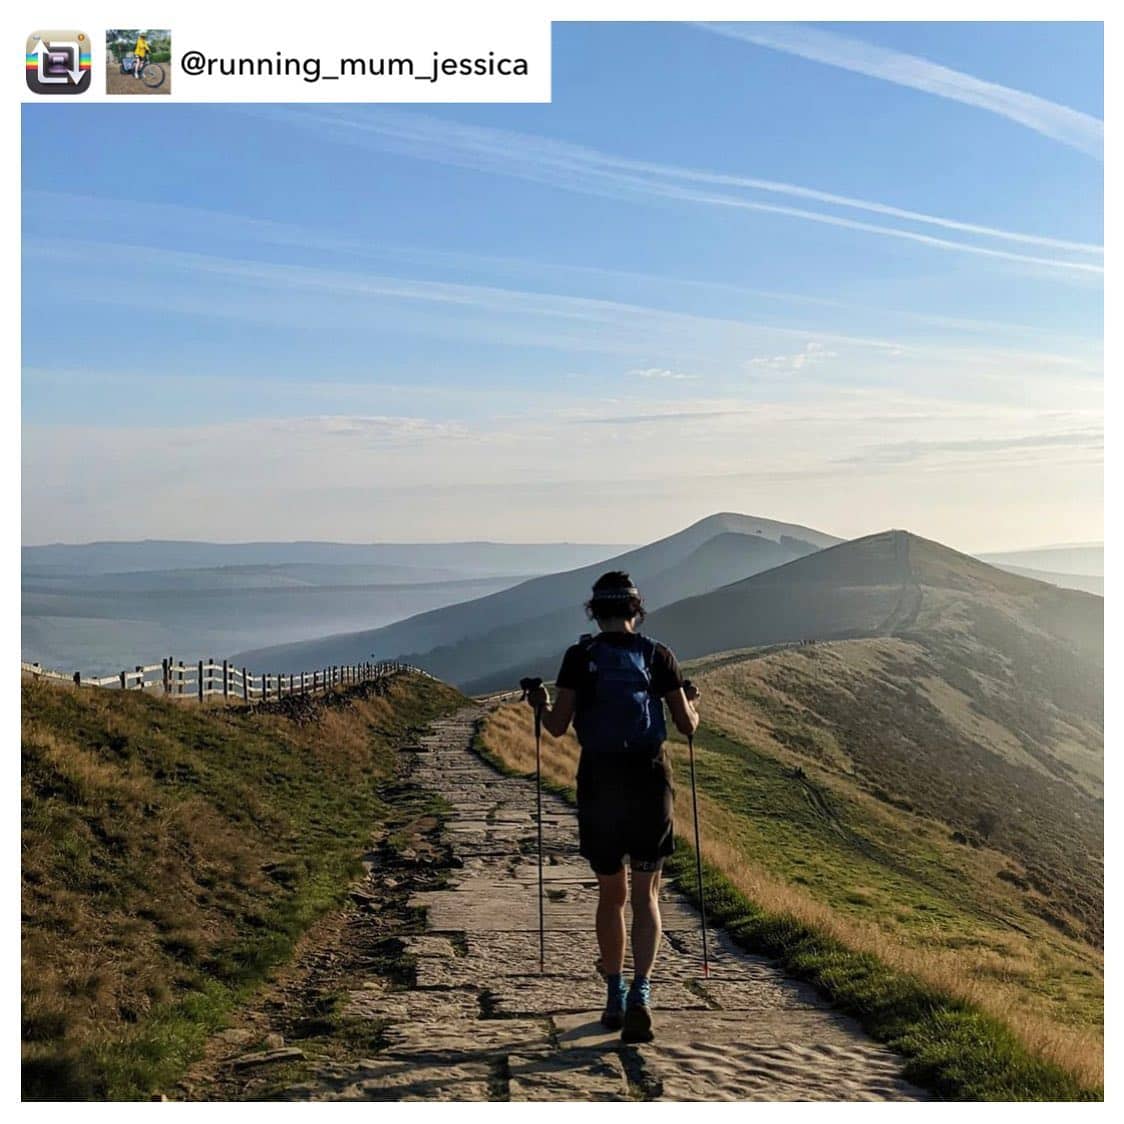 Repost from @running_mum_jessica - we’re so glad you had a great time and thank you for the kind ...